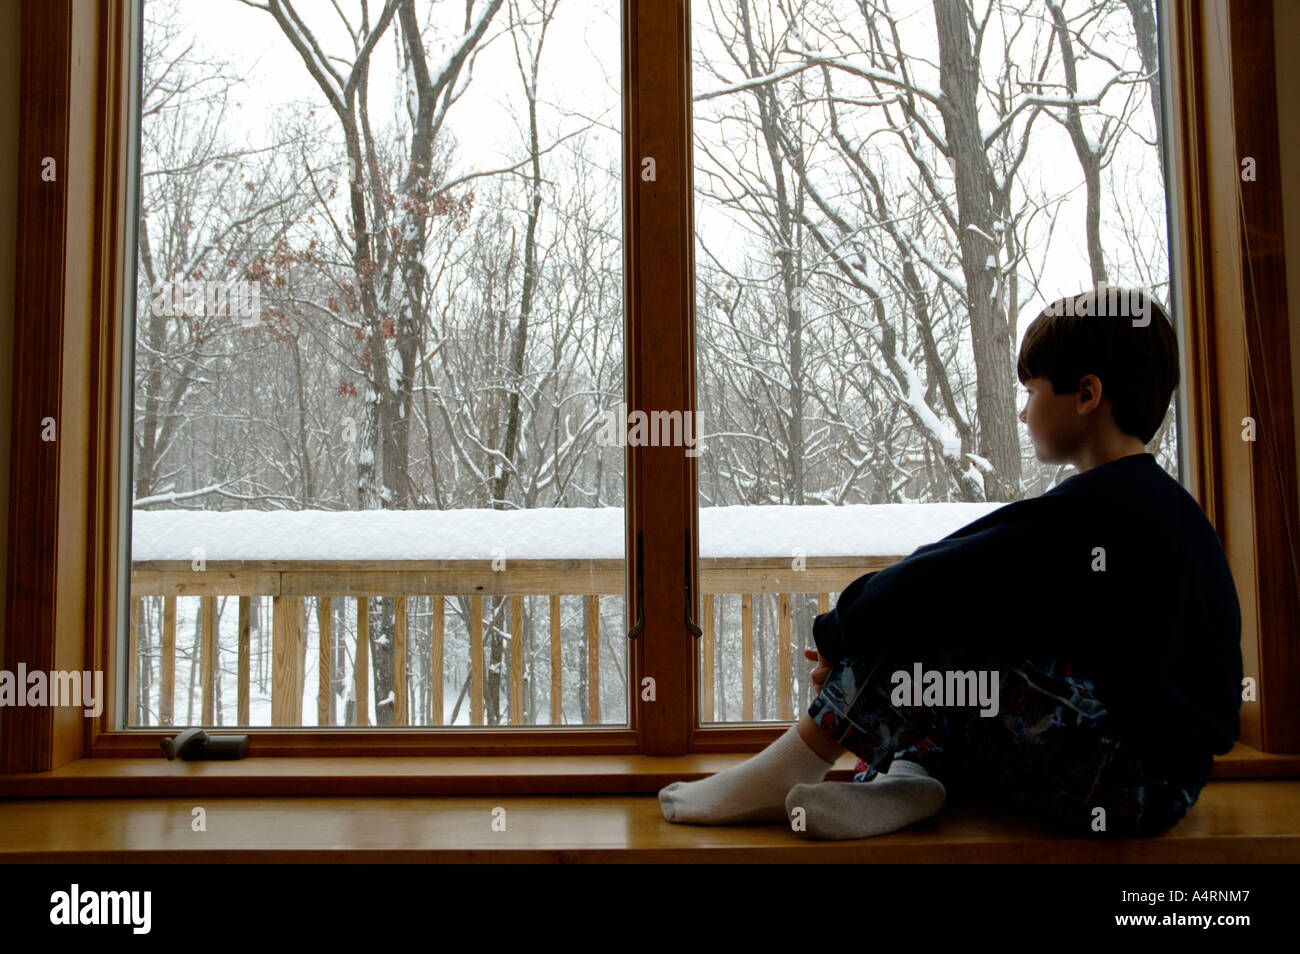 Young boy looks out window on a gray snowy day Stock Photo